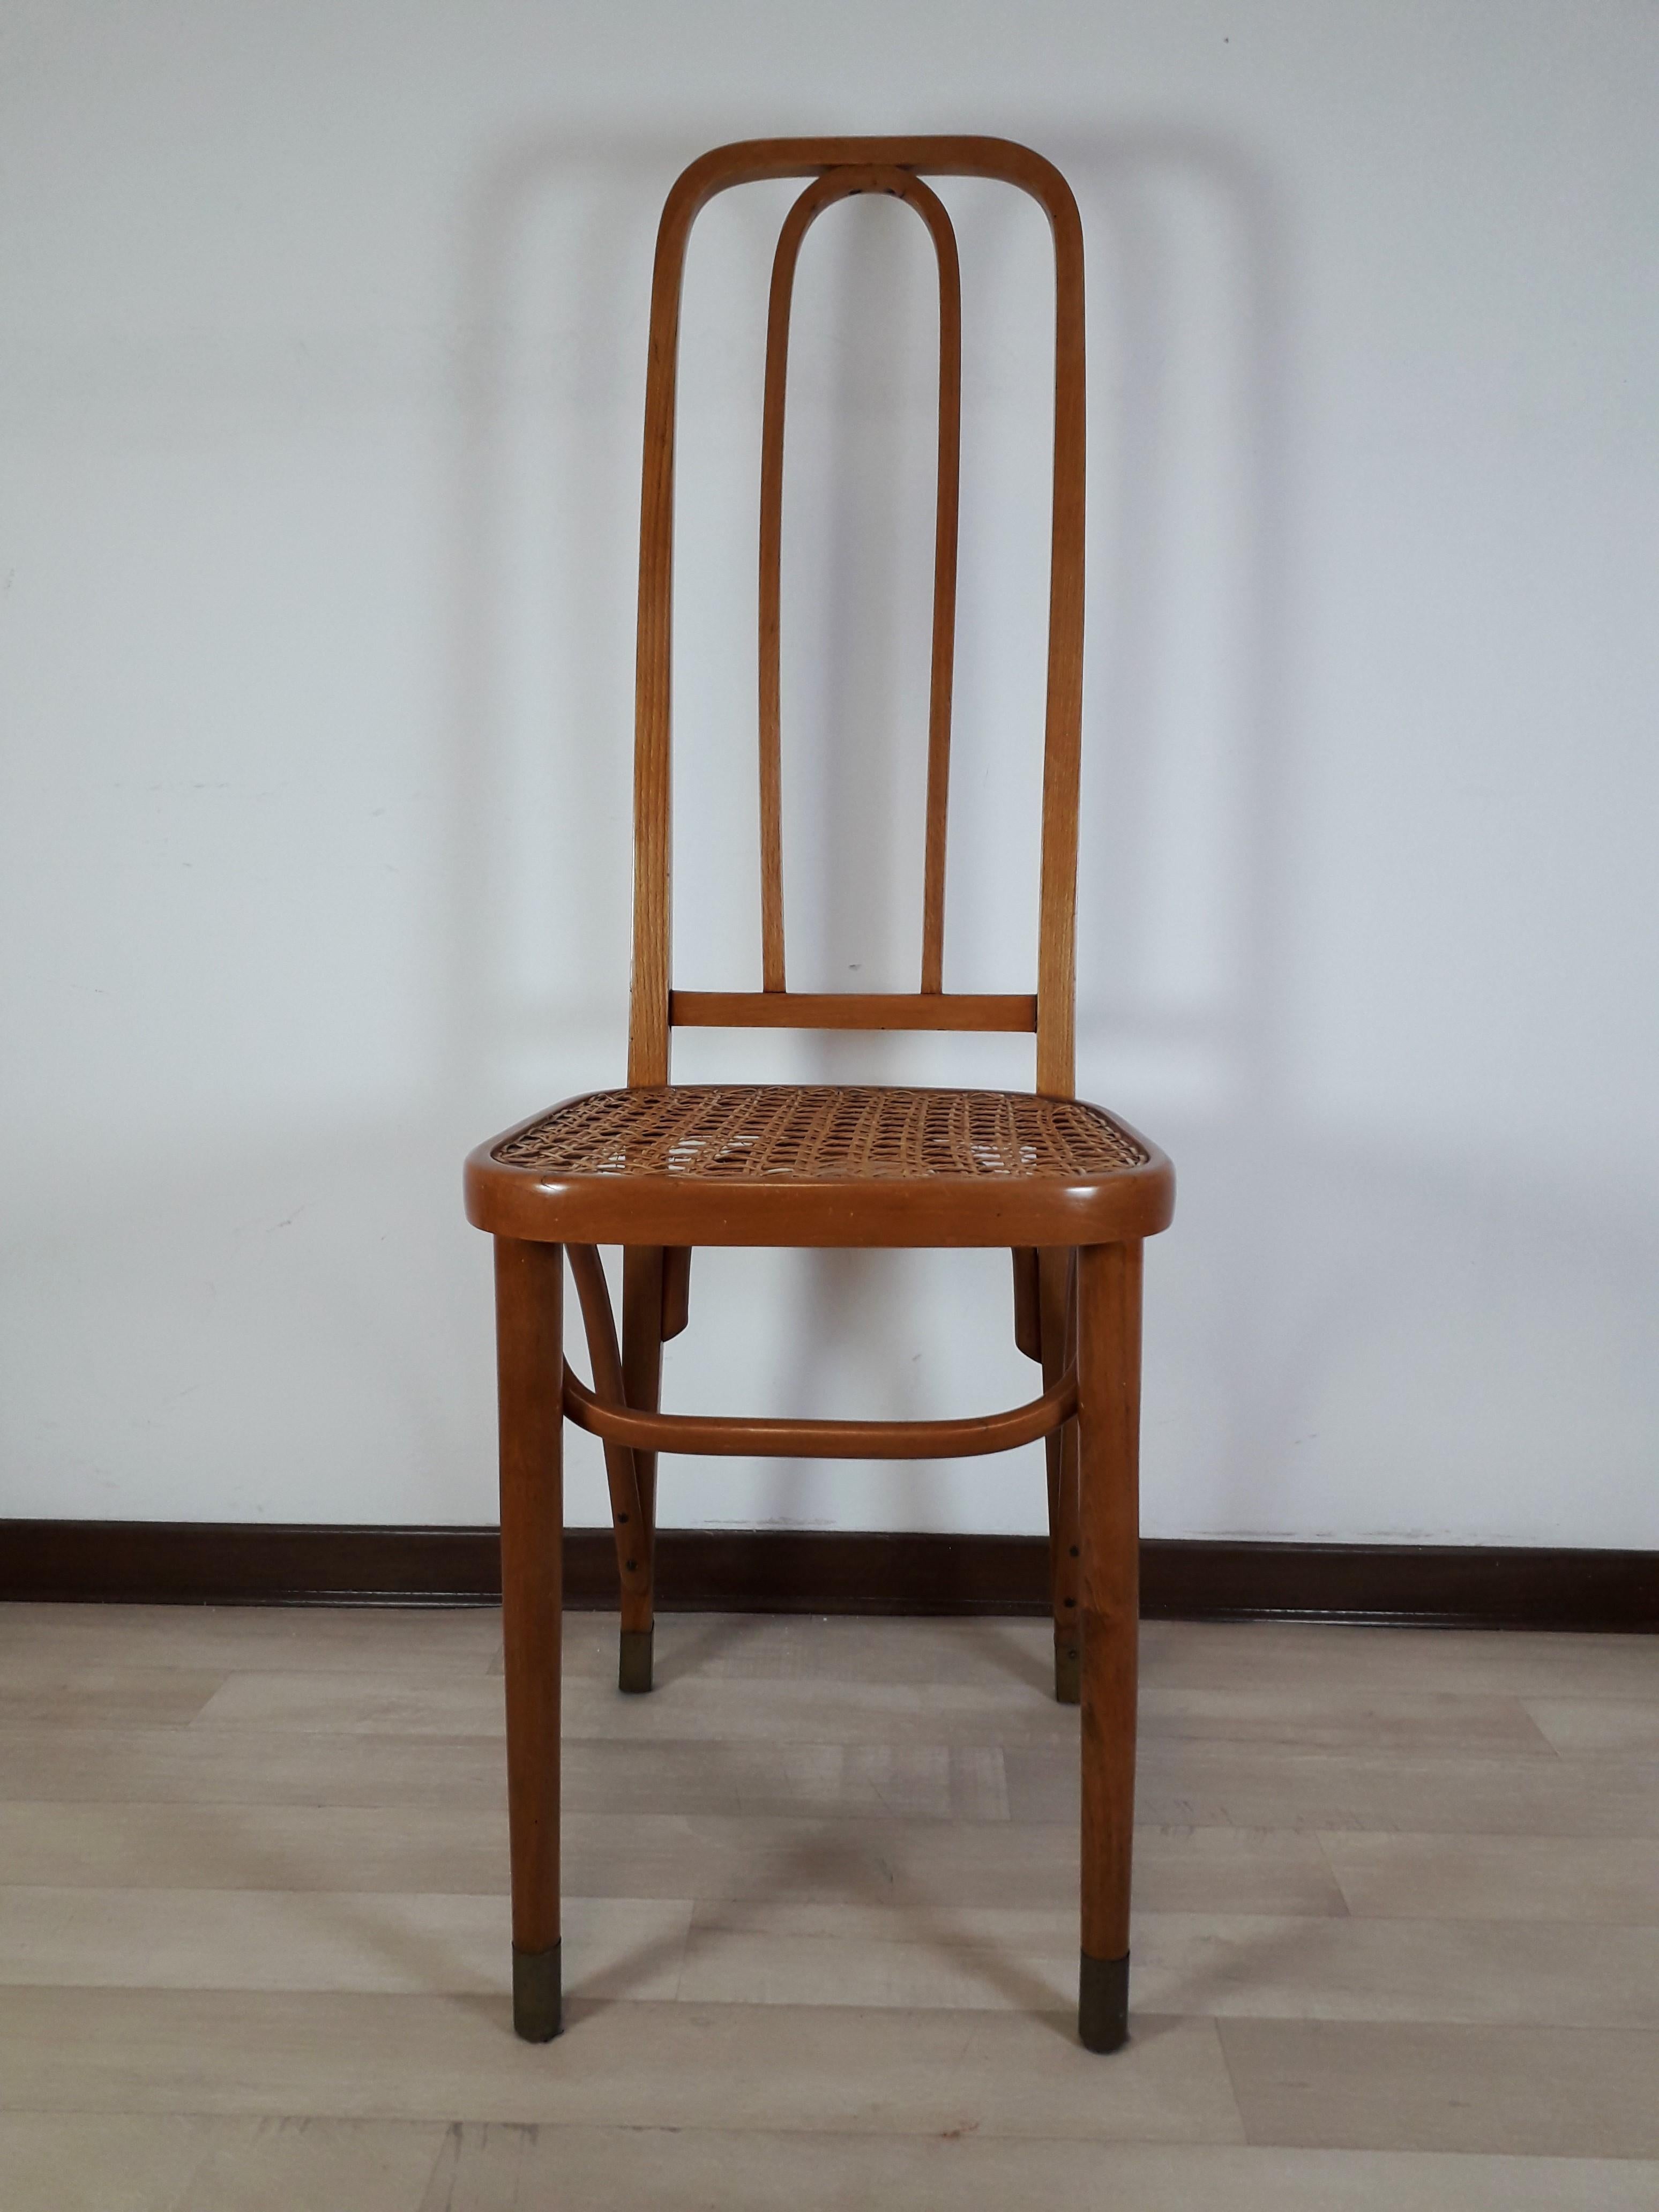 Superb and very rare chair from the 